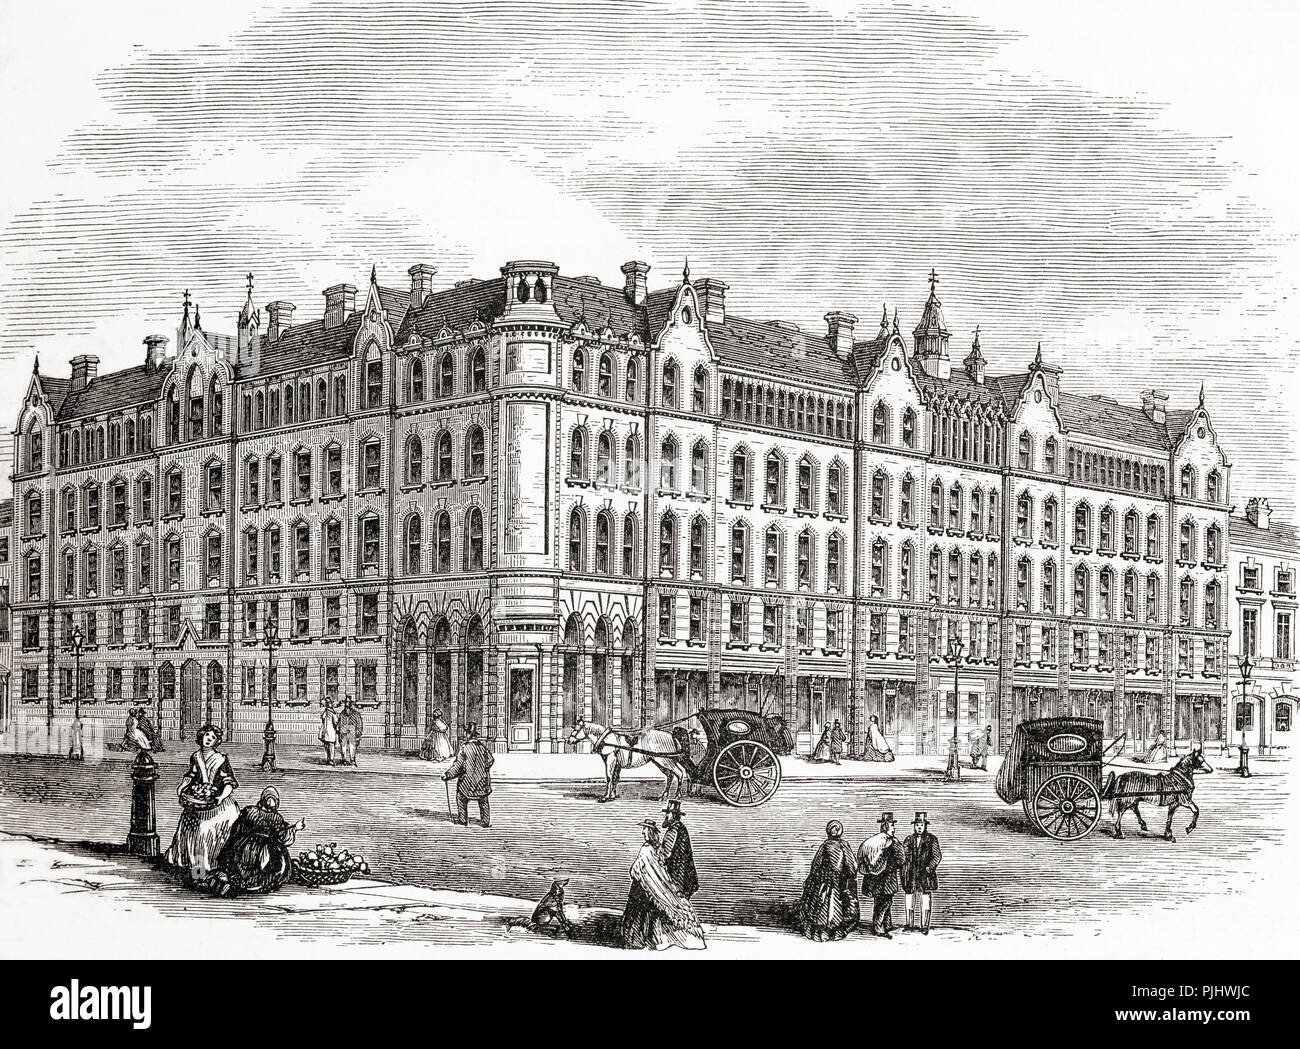 The 'Peabody' dwellings for the industrious poor in Commercial Street, Spitalfields, London, England  in the 19th century. George Peabody was an American financier and philanthropist who established the Peabody Donation Fund, today called the Peabody Trust, to provide decent housing for the poor labourers of London.   From London Pictures, published 1890. Stock Photo